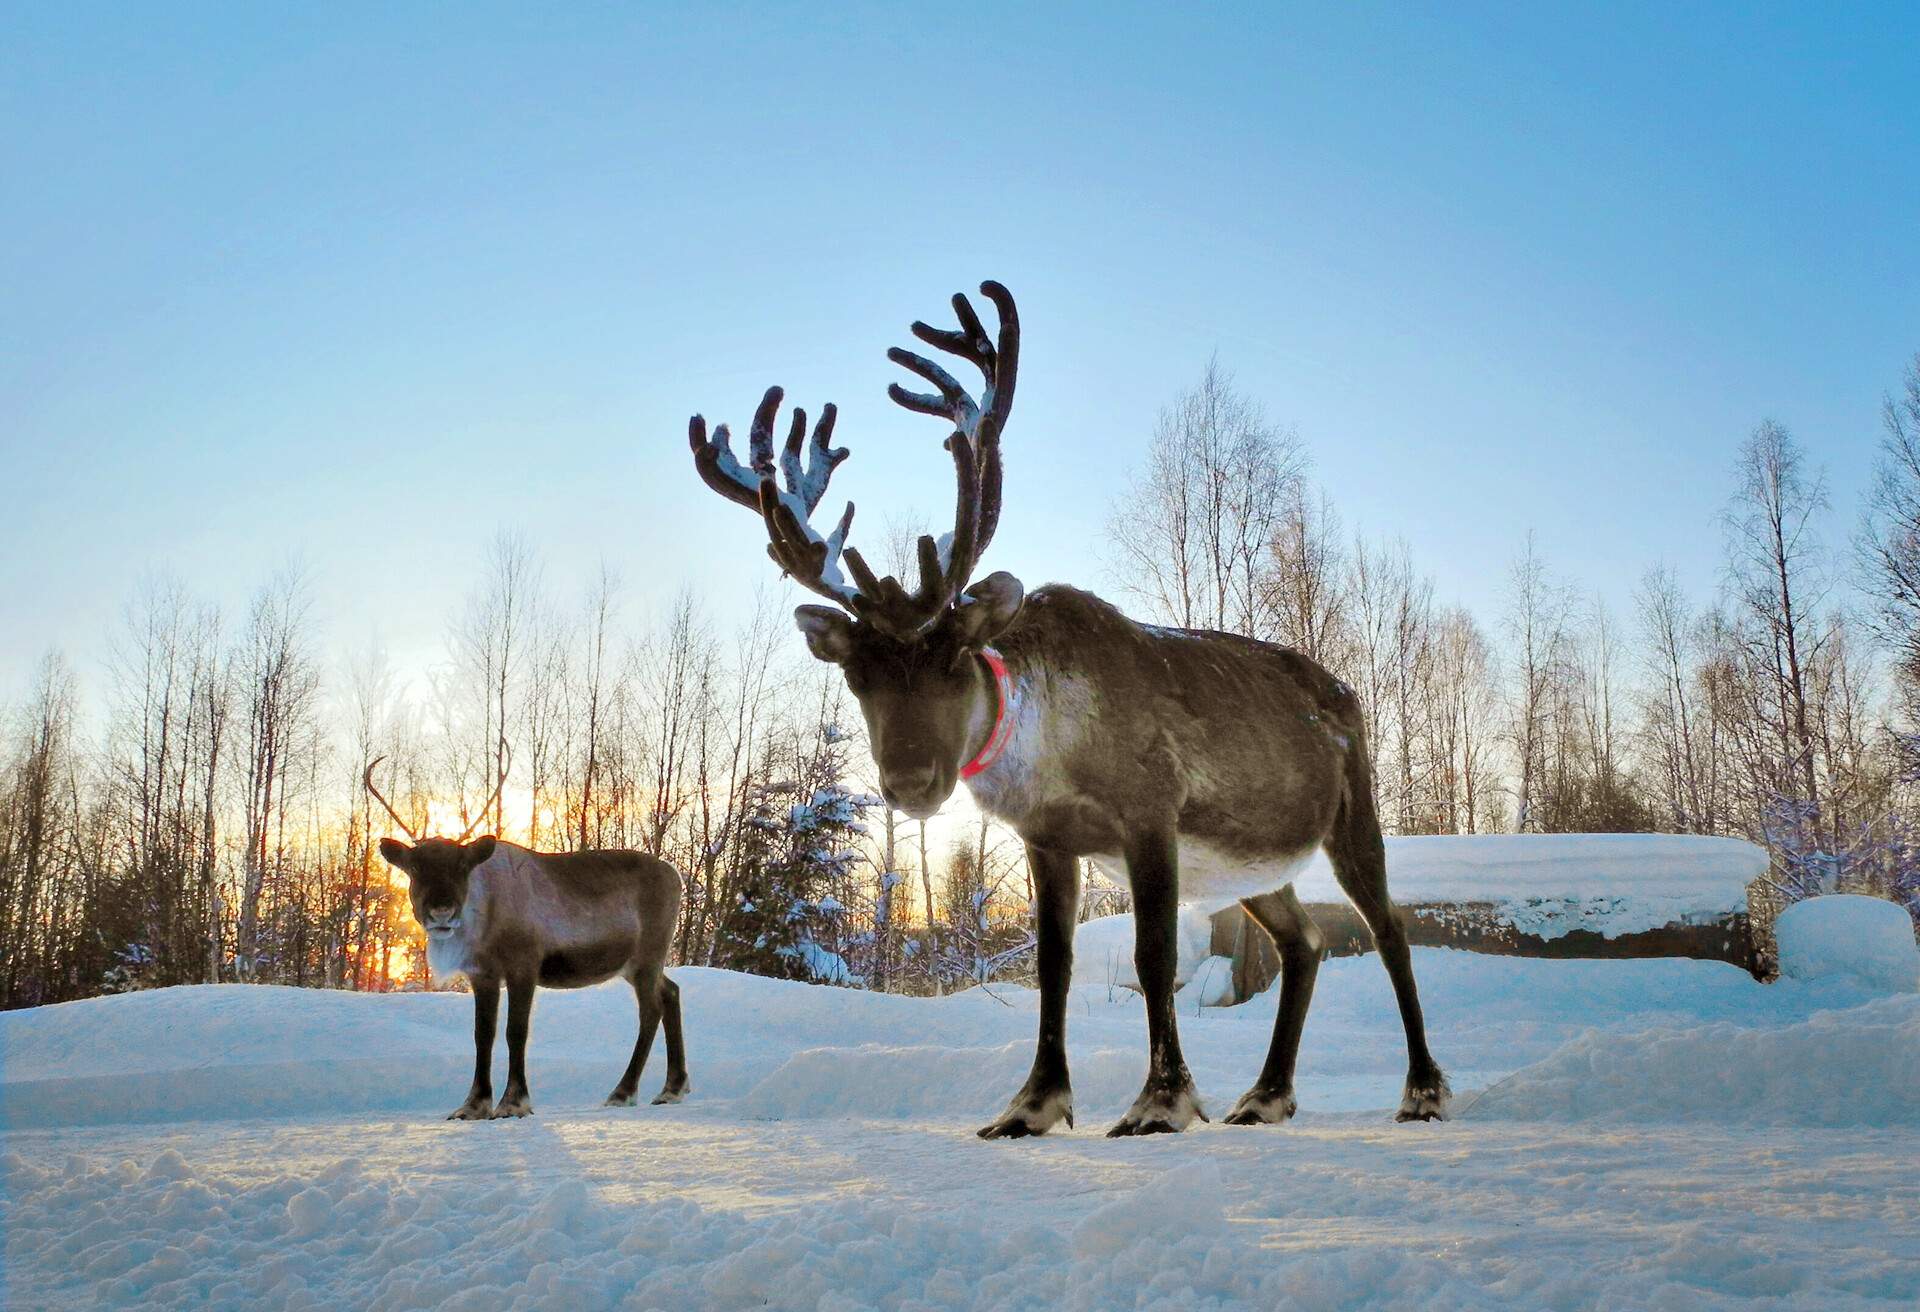 Two brown reindeers with massive antlers standing on a snowfield against the bare forest.